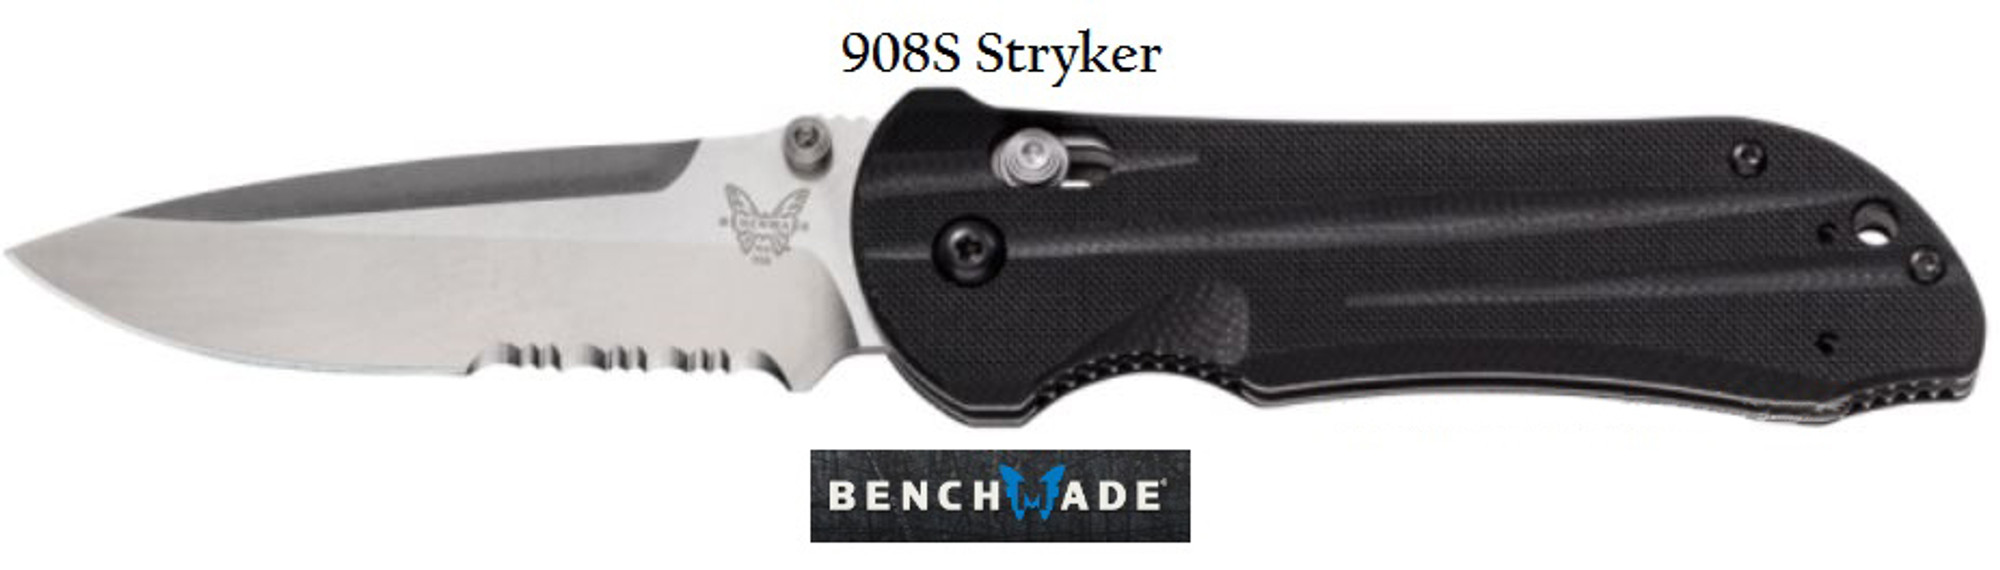 Benchmade 908S Stryker Partially Serrated